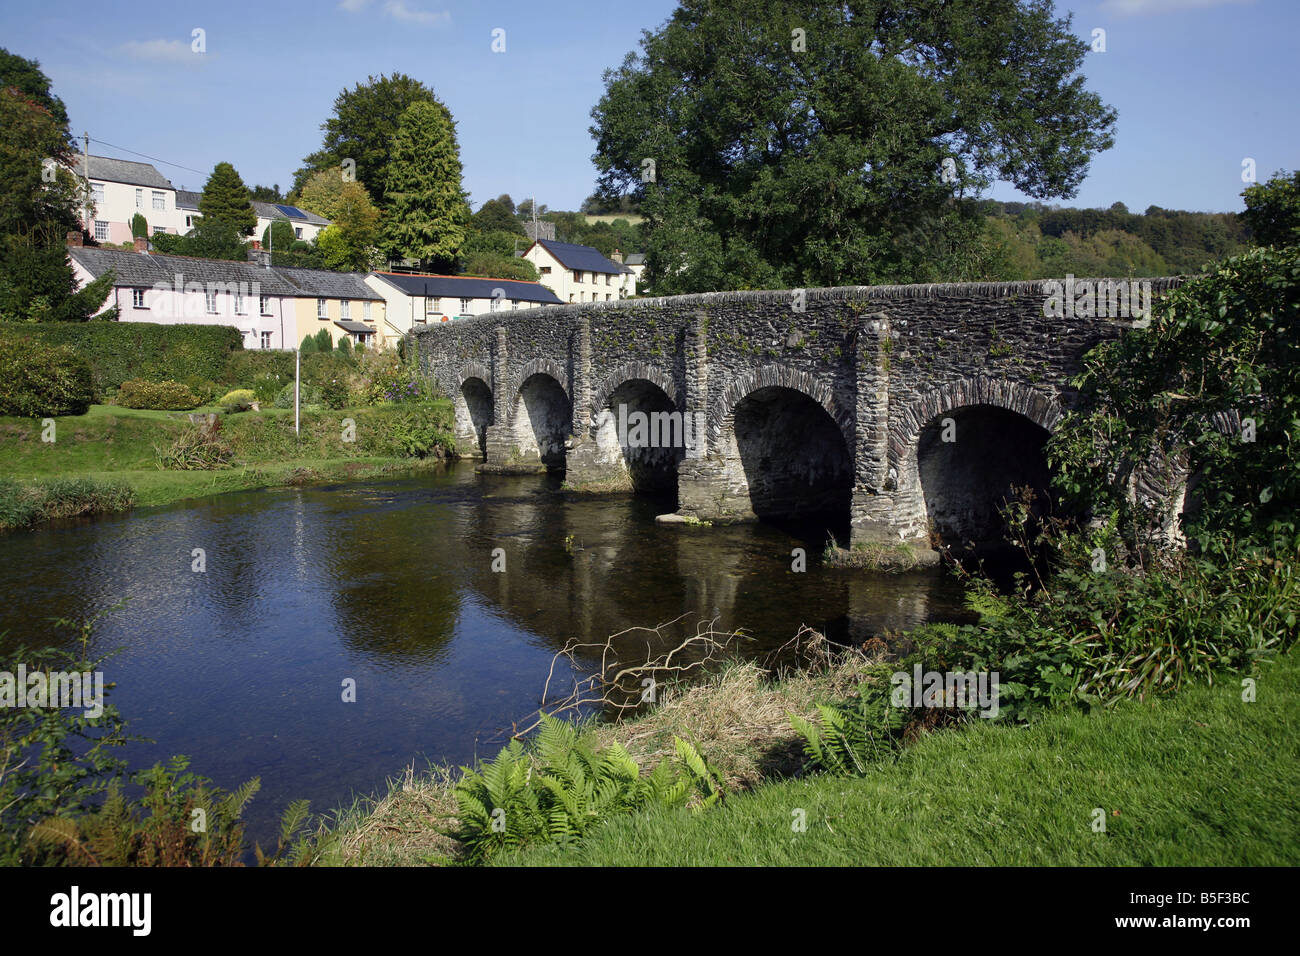 Picturesque village of Withypool on the River Barle near the centre of Exmoor National Park near Exford Stock Photo